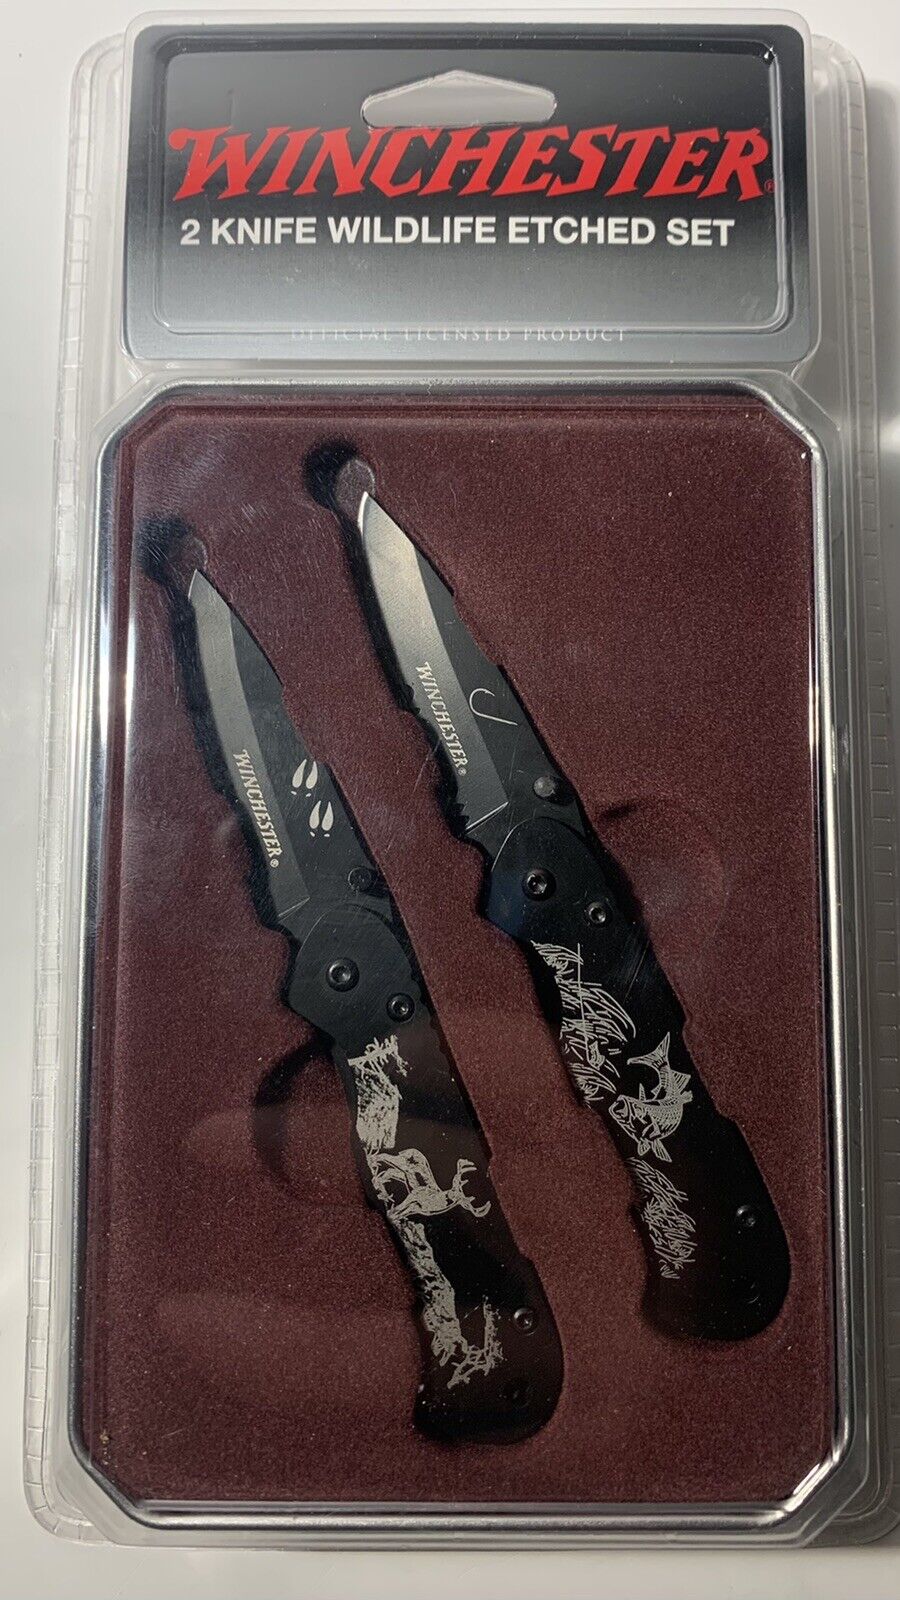 Wildlife Etched Winchester 2 Knife Set Buck Hunting Bass Fishing Outdoorsman